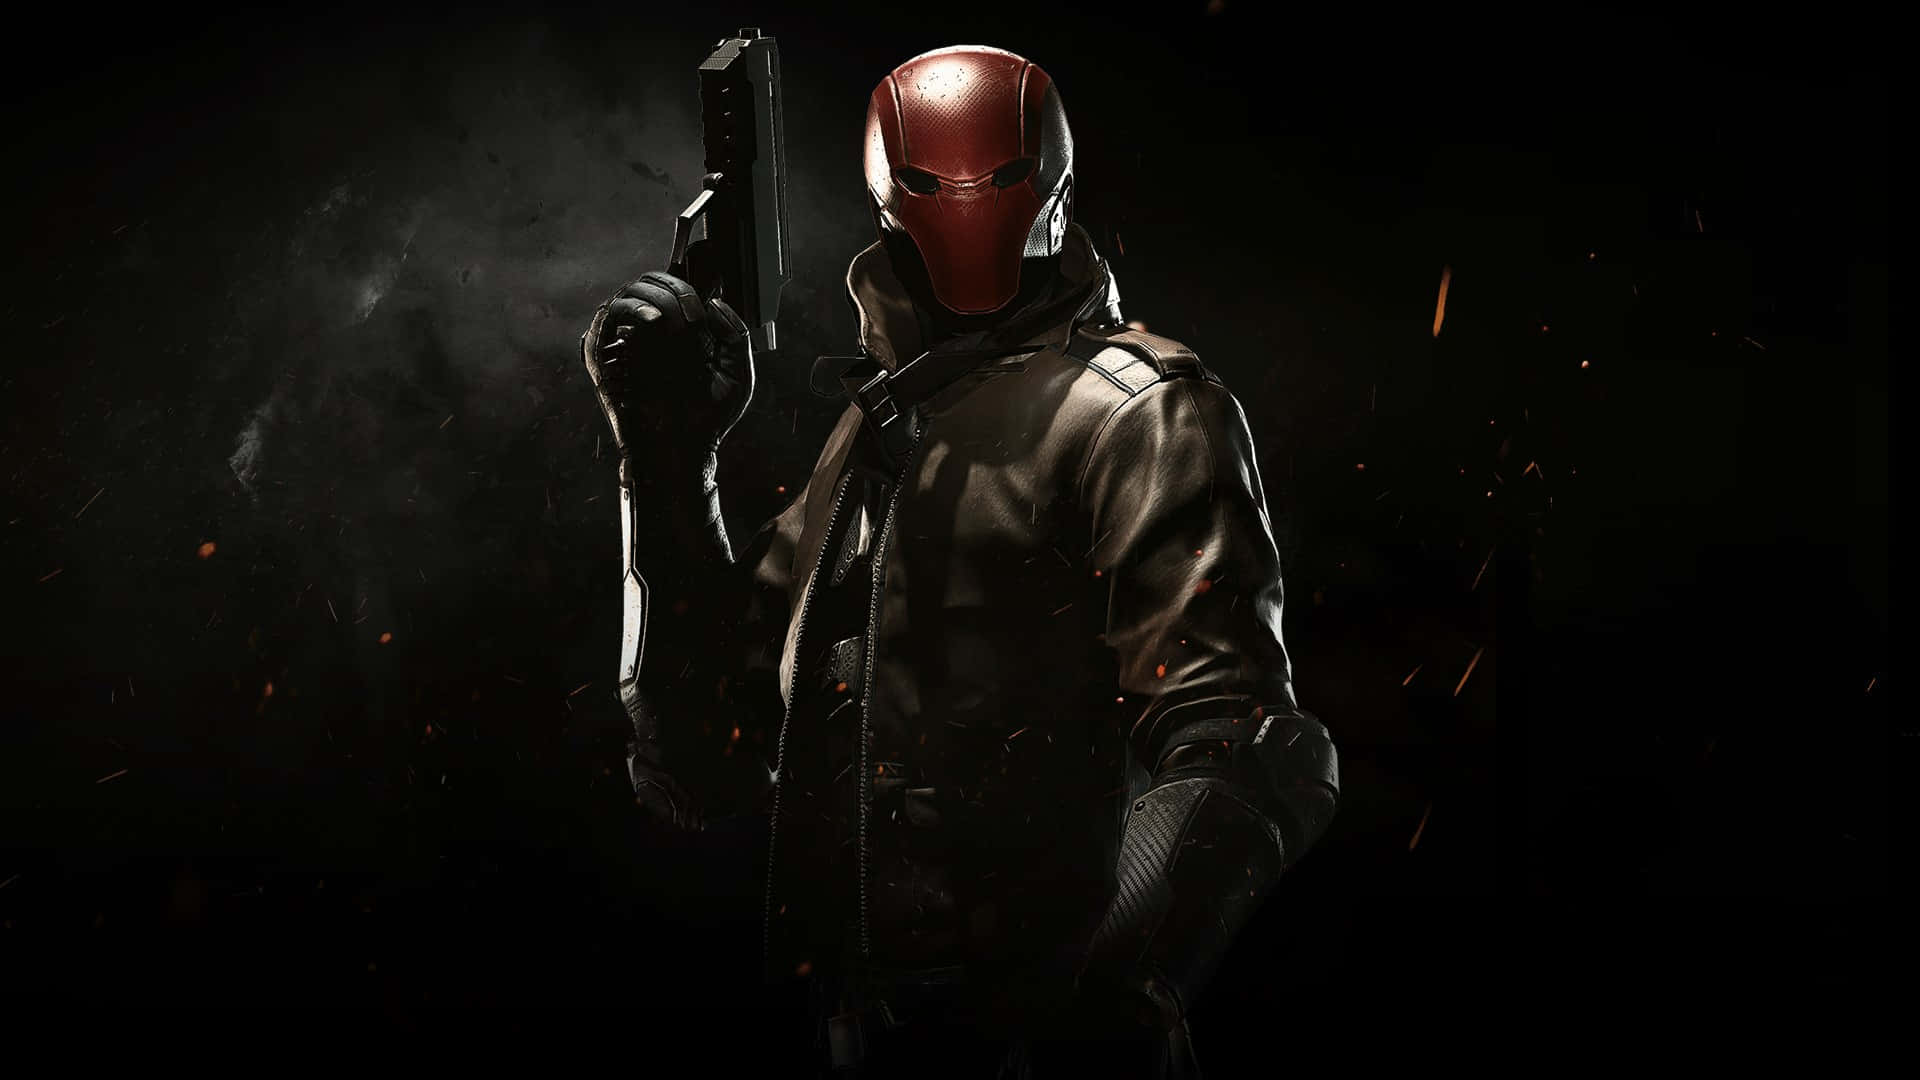 A menacing Red Hood looms in the darkness